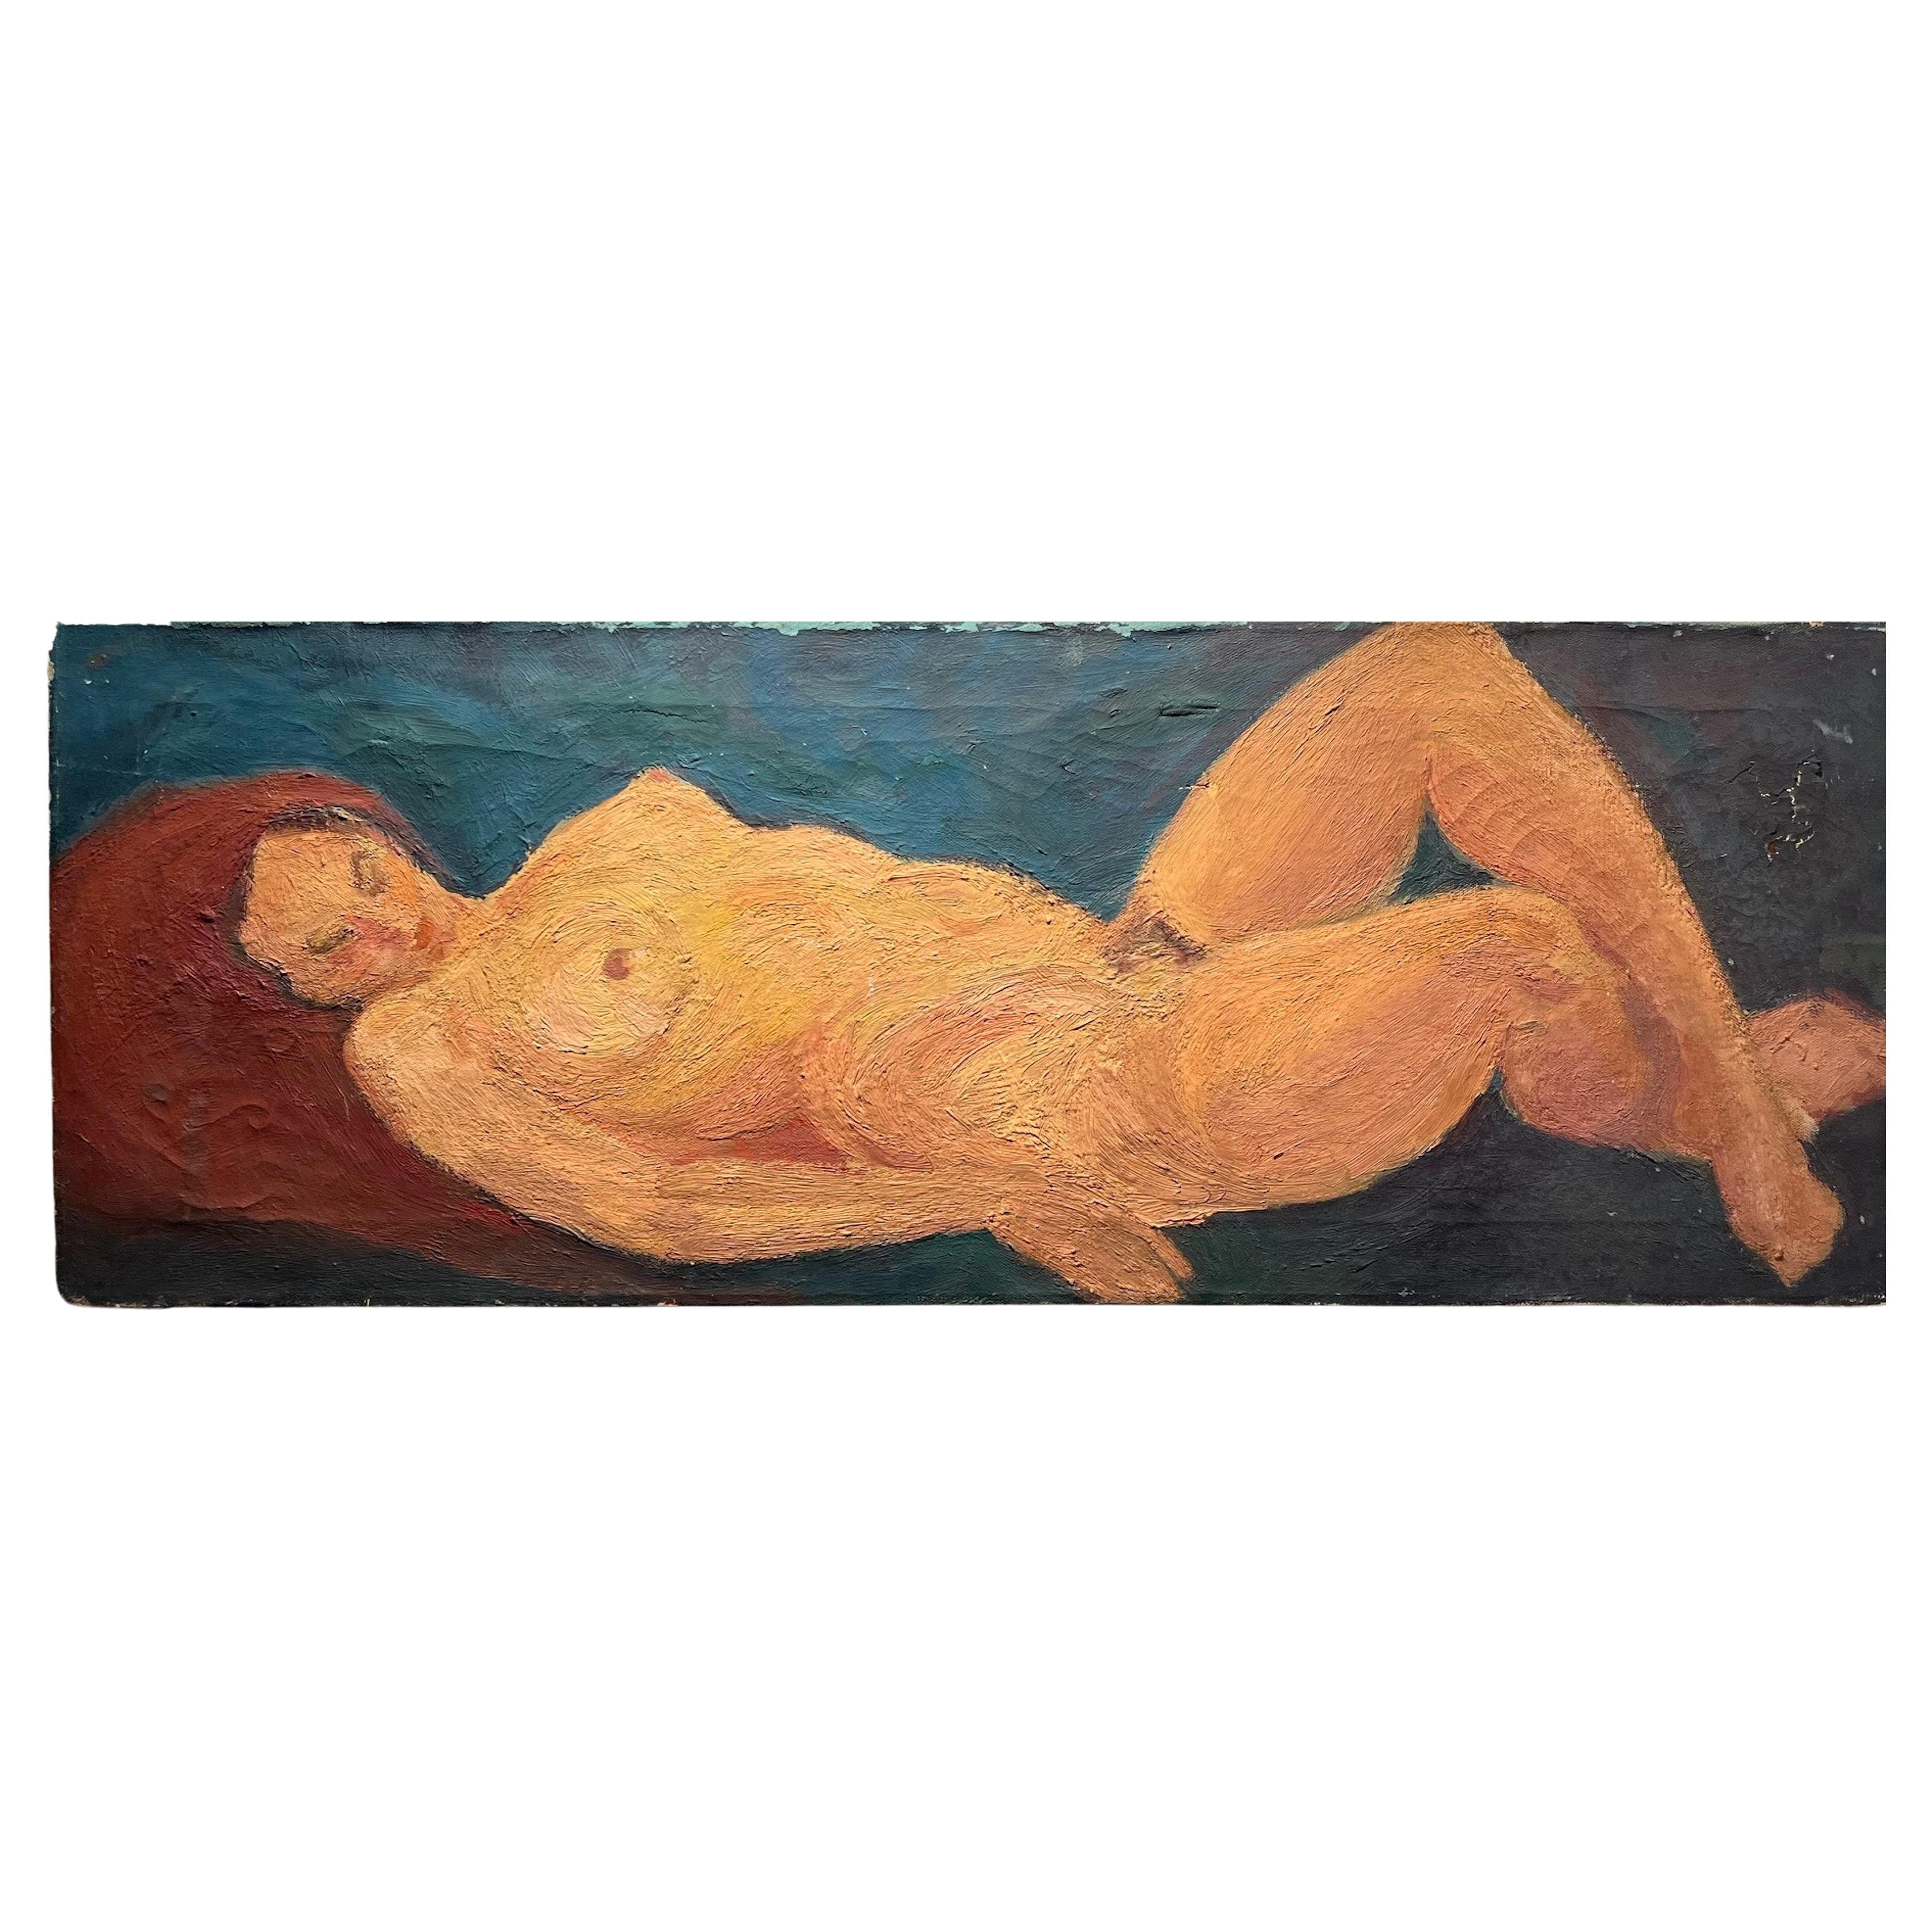 Post Impressionist Painting Reclining Nude by Adolf Hoelzel (1854-1934)